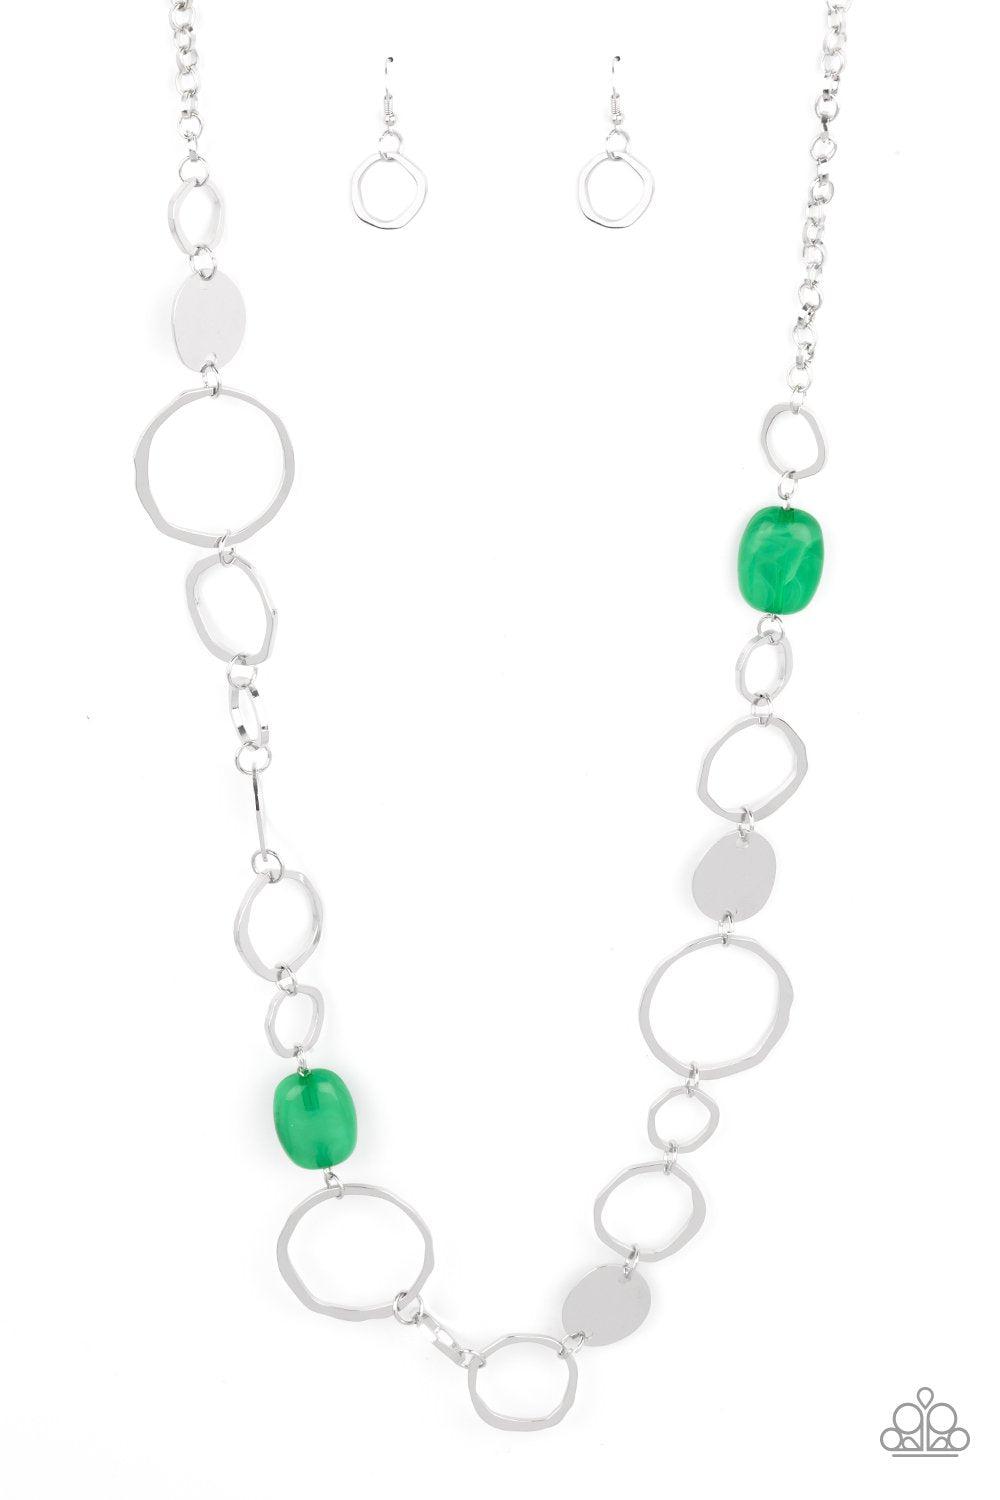 Colorful Combo Green and Silver Necklace - Paparazzi Accessories- lightbox - CarasShop.com - $5 Jewelry by Cara Jewels